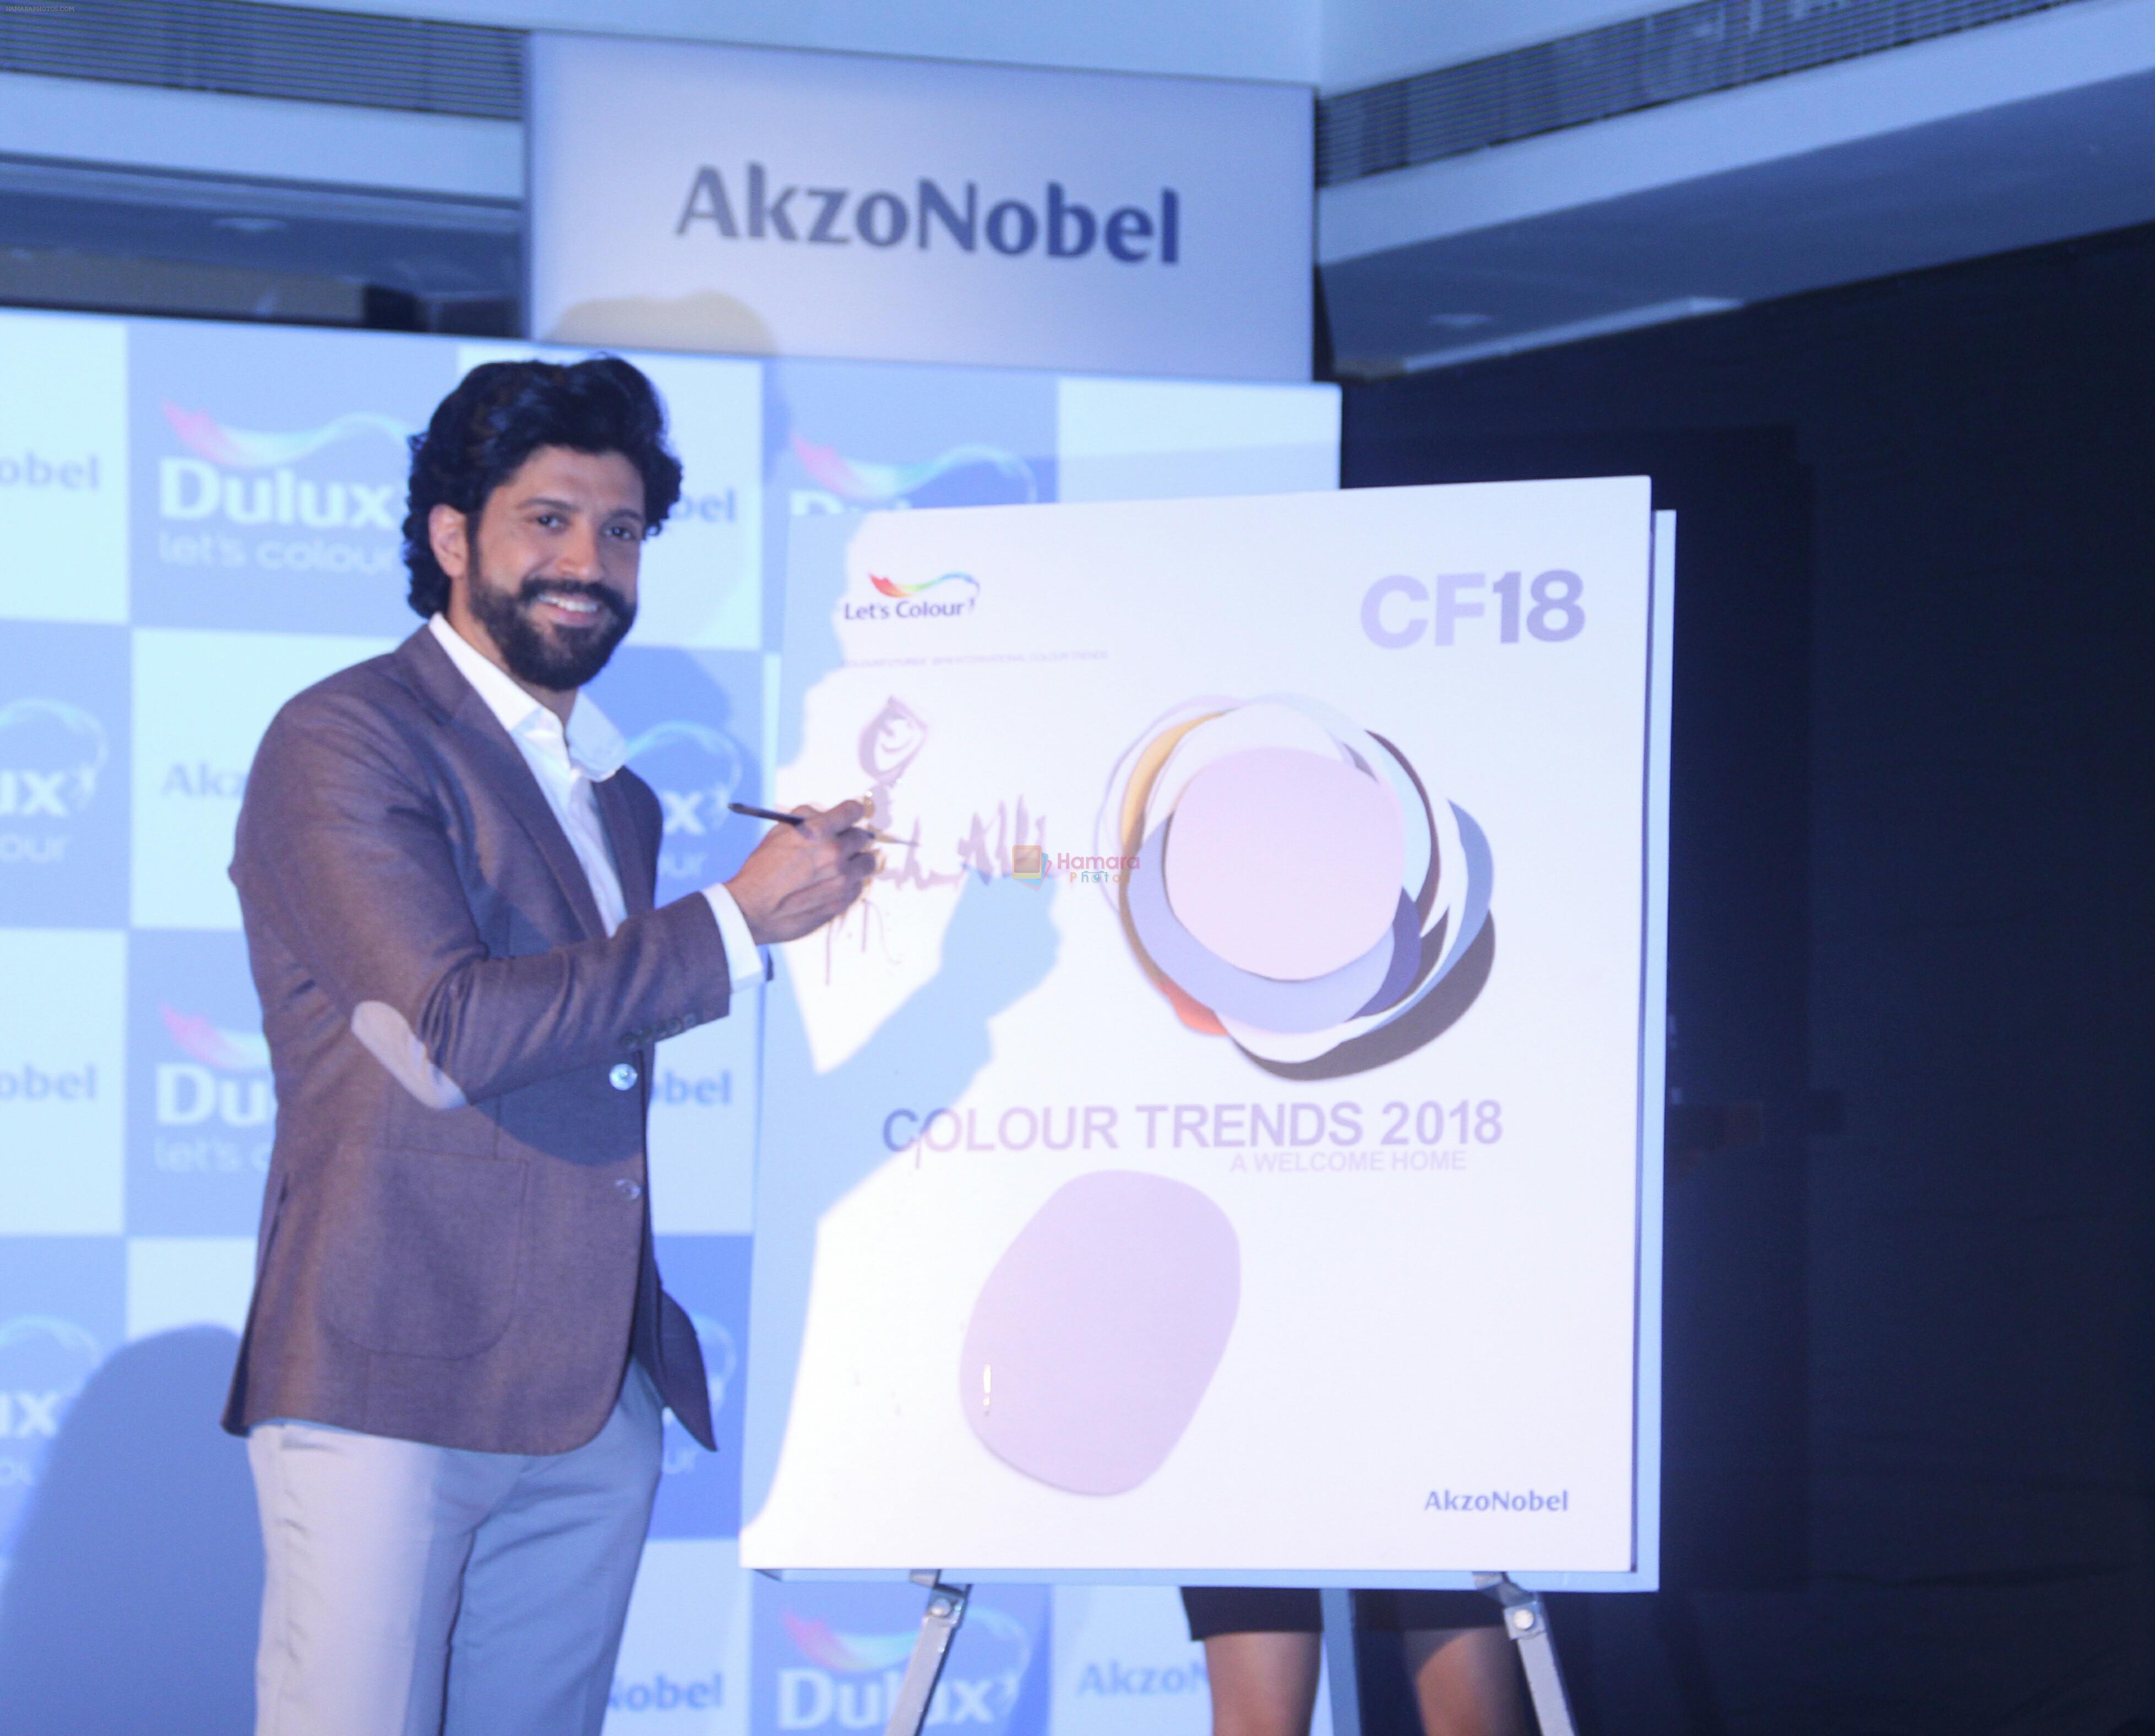 Farhan Akhtar At The Launch Of Dulux Colour Future International Colour Trends 2018 At St Regis on 16th Jan 2017